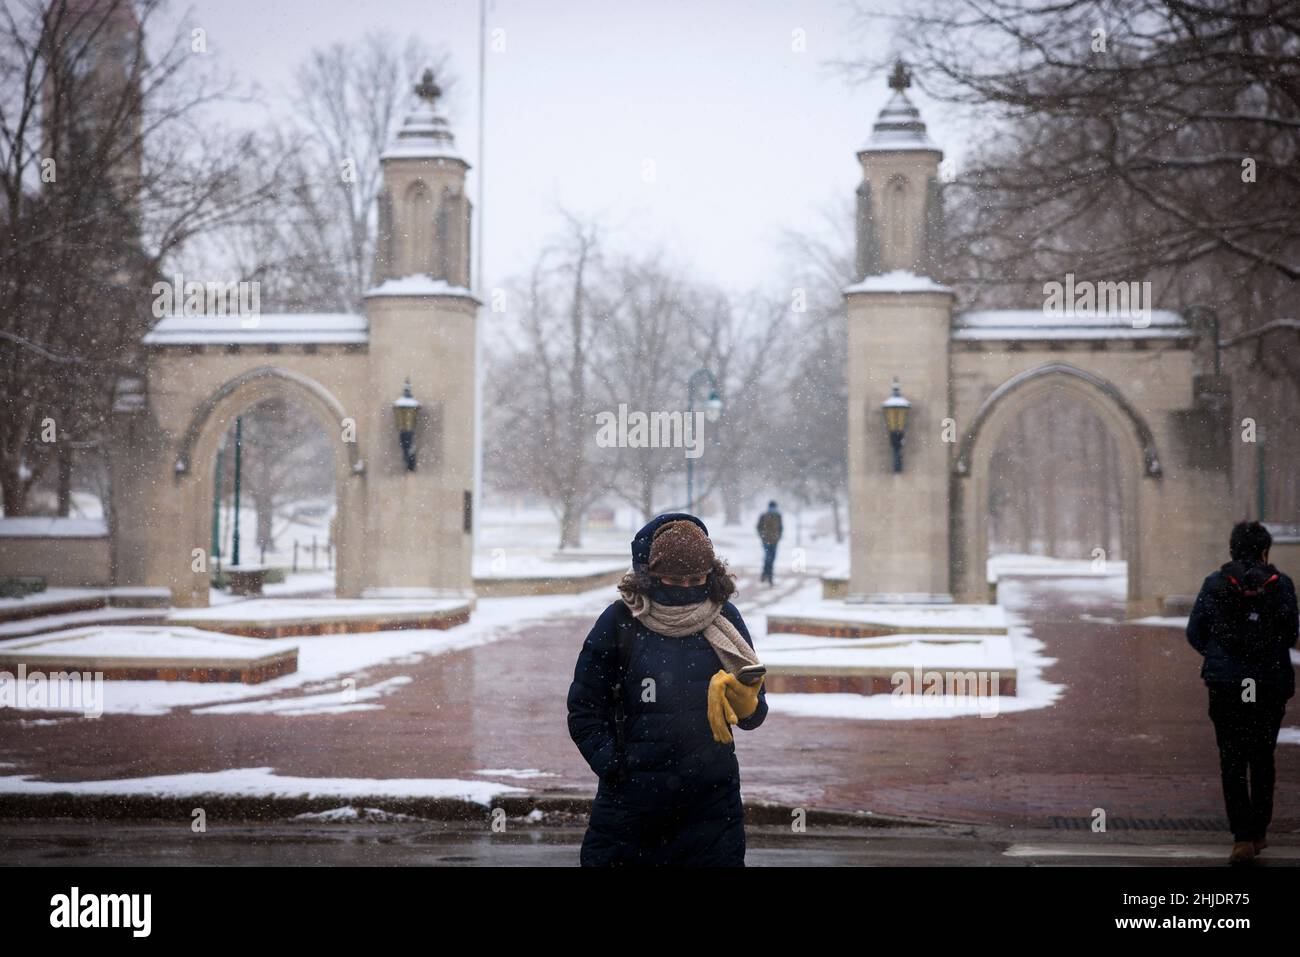 BLOOMINGTON, UNITED STATES - 2022/01/28: Snow falls at the Sample Gates on  Kirkwood Avenue on January 28, 2022, in Bloomington, Ind. (Photo by Jeremy  Hogan/The Bloomingtonian Stock Photo - Alamy